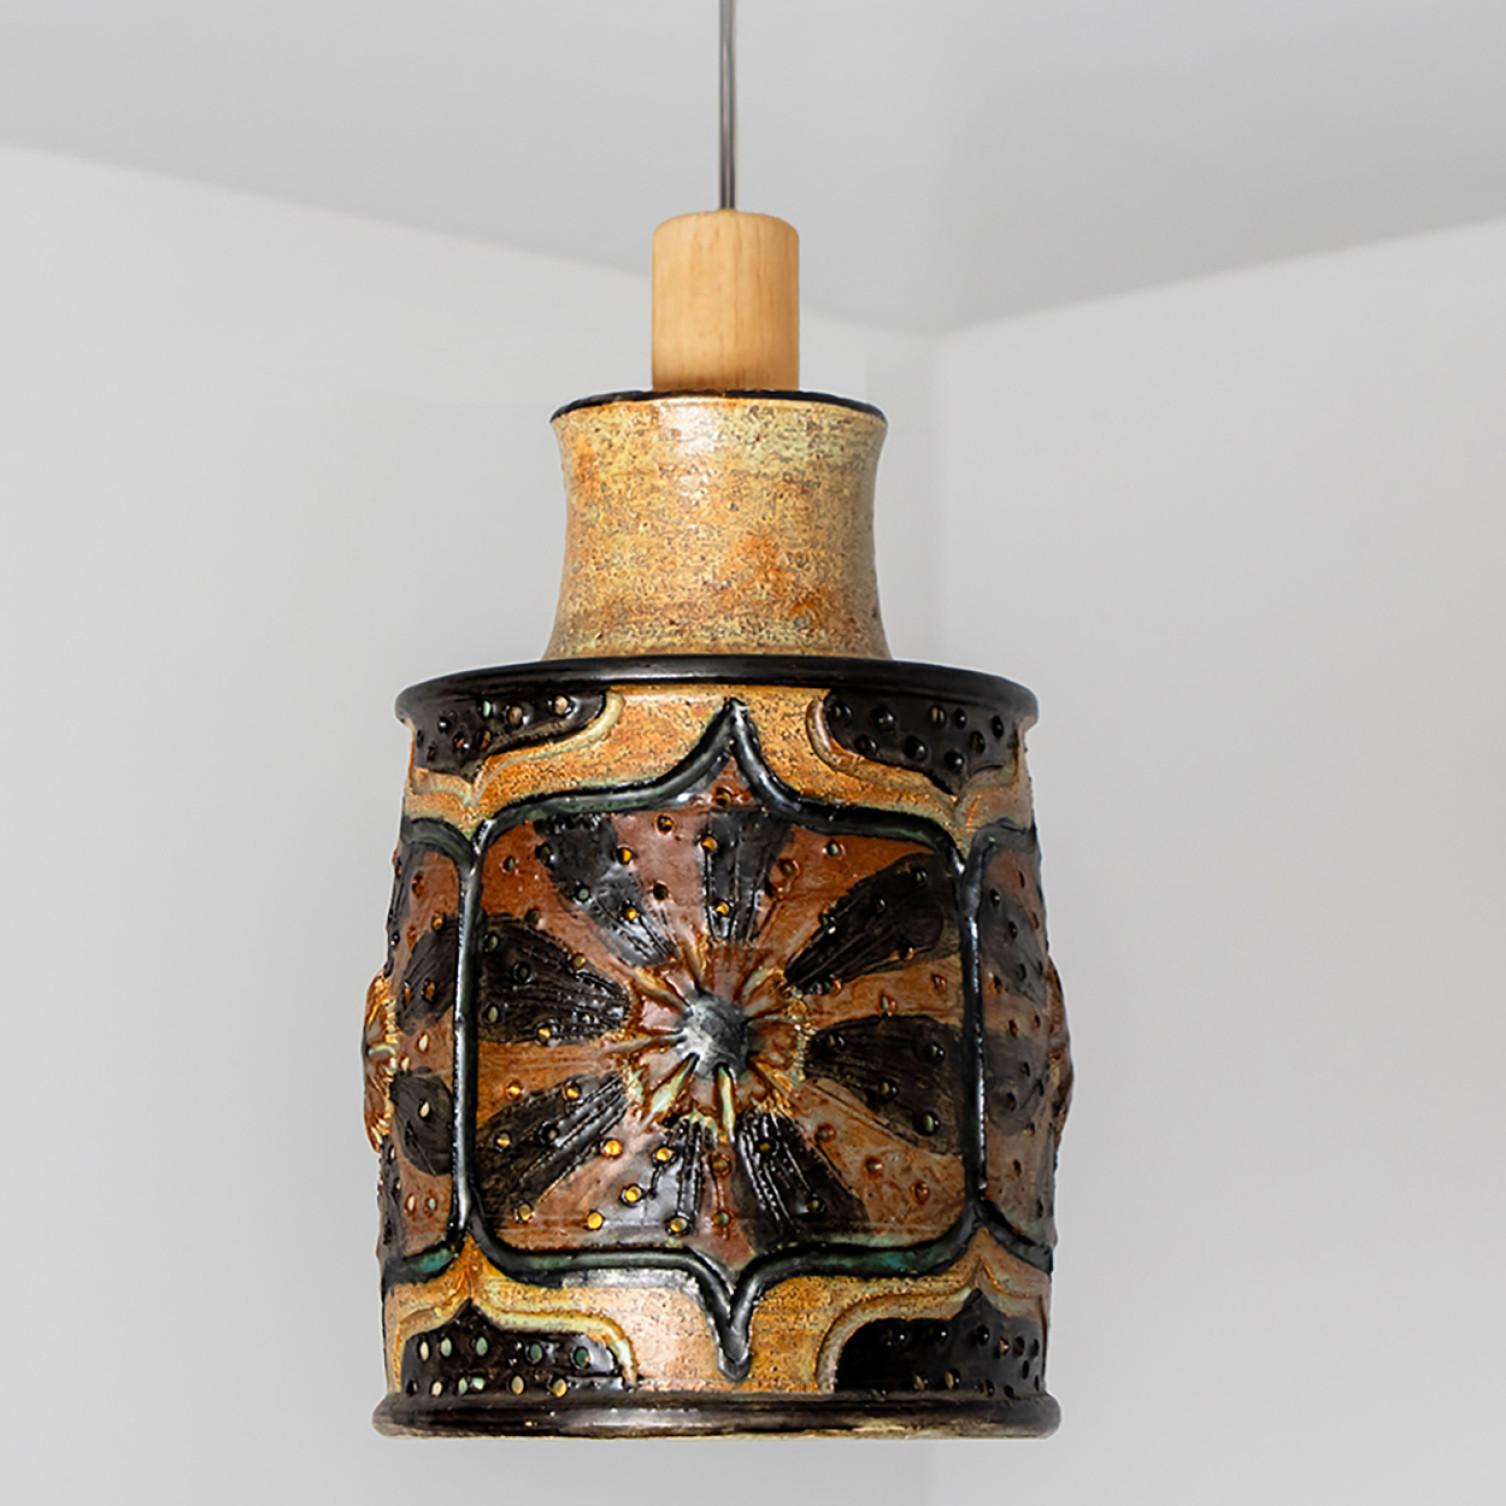 Stunning round hanging lamp with a cone-like shape, made with rich orange and green colored brown ceramics, manufactured in the 1970s in Denmark. We also have a multitude of unique colored ceramic light sets and arrangements, all available in the